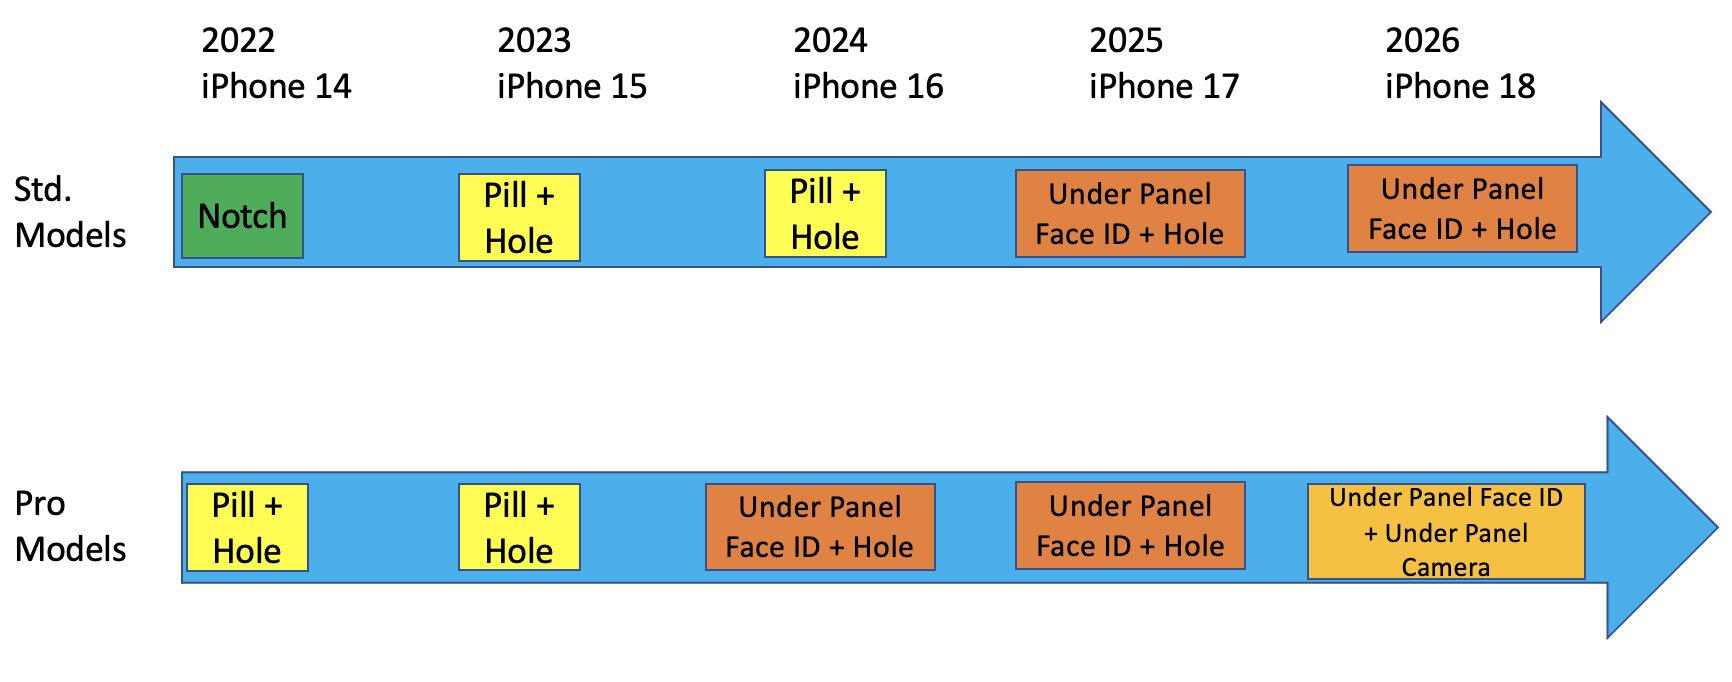 Ross Young's iPhone display roadmap